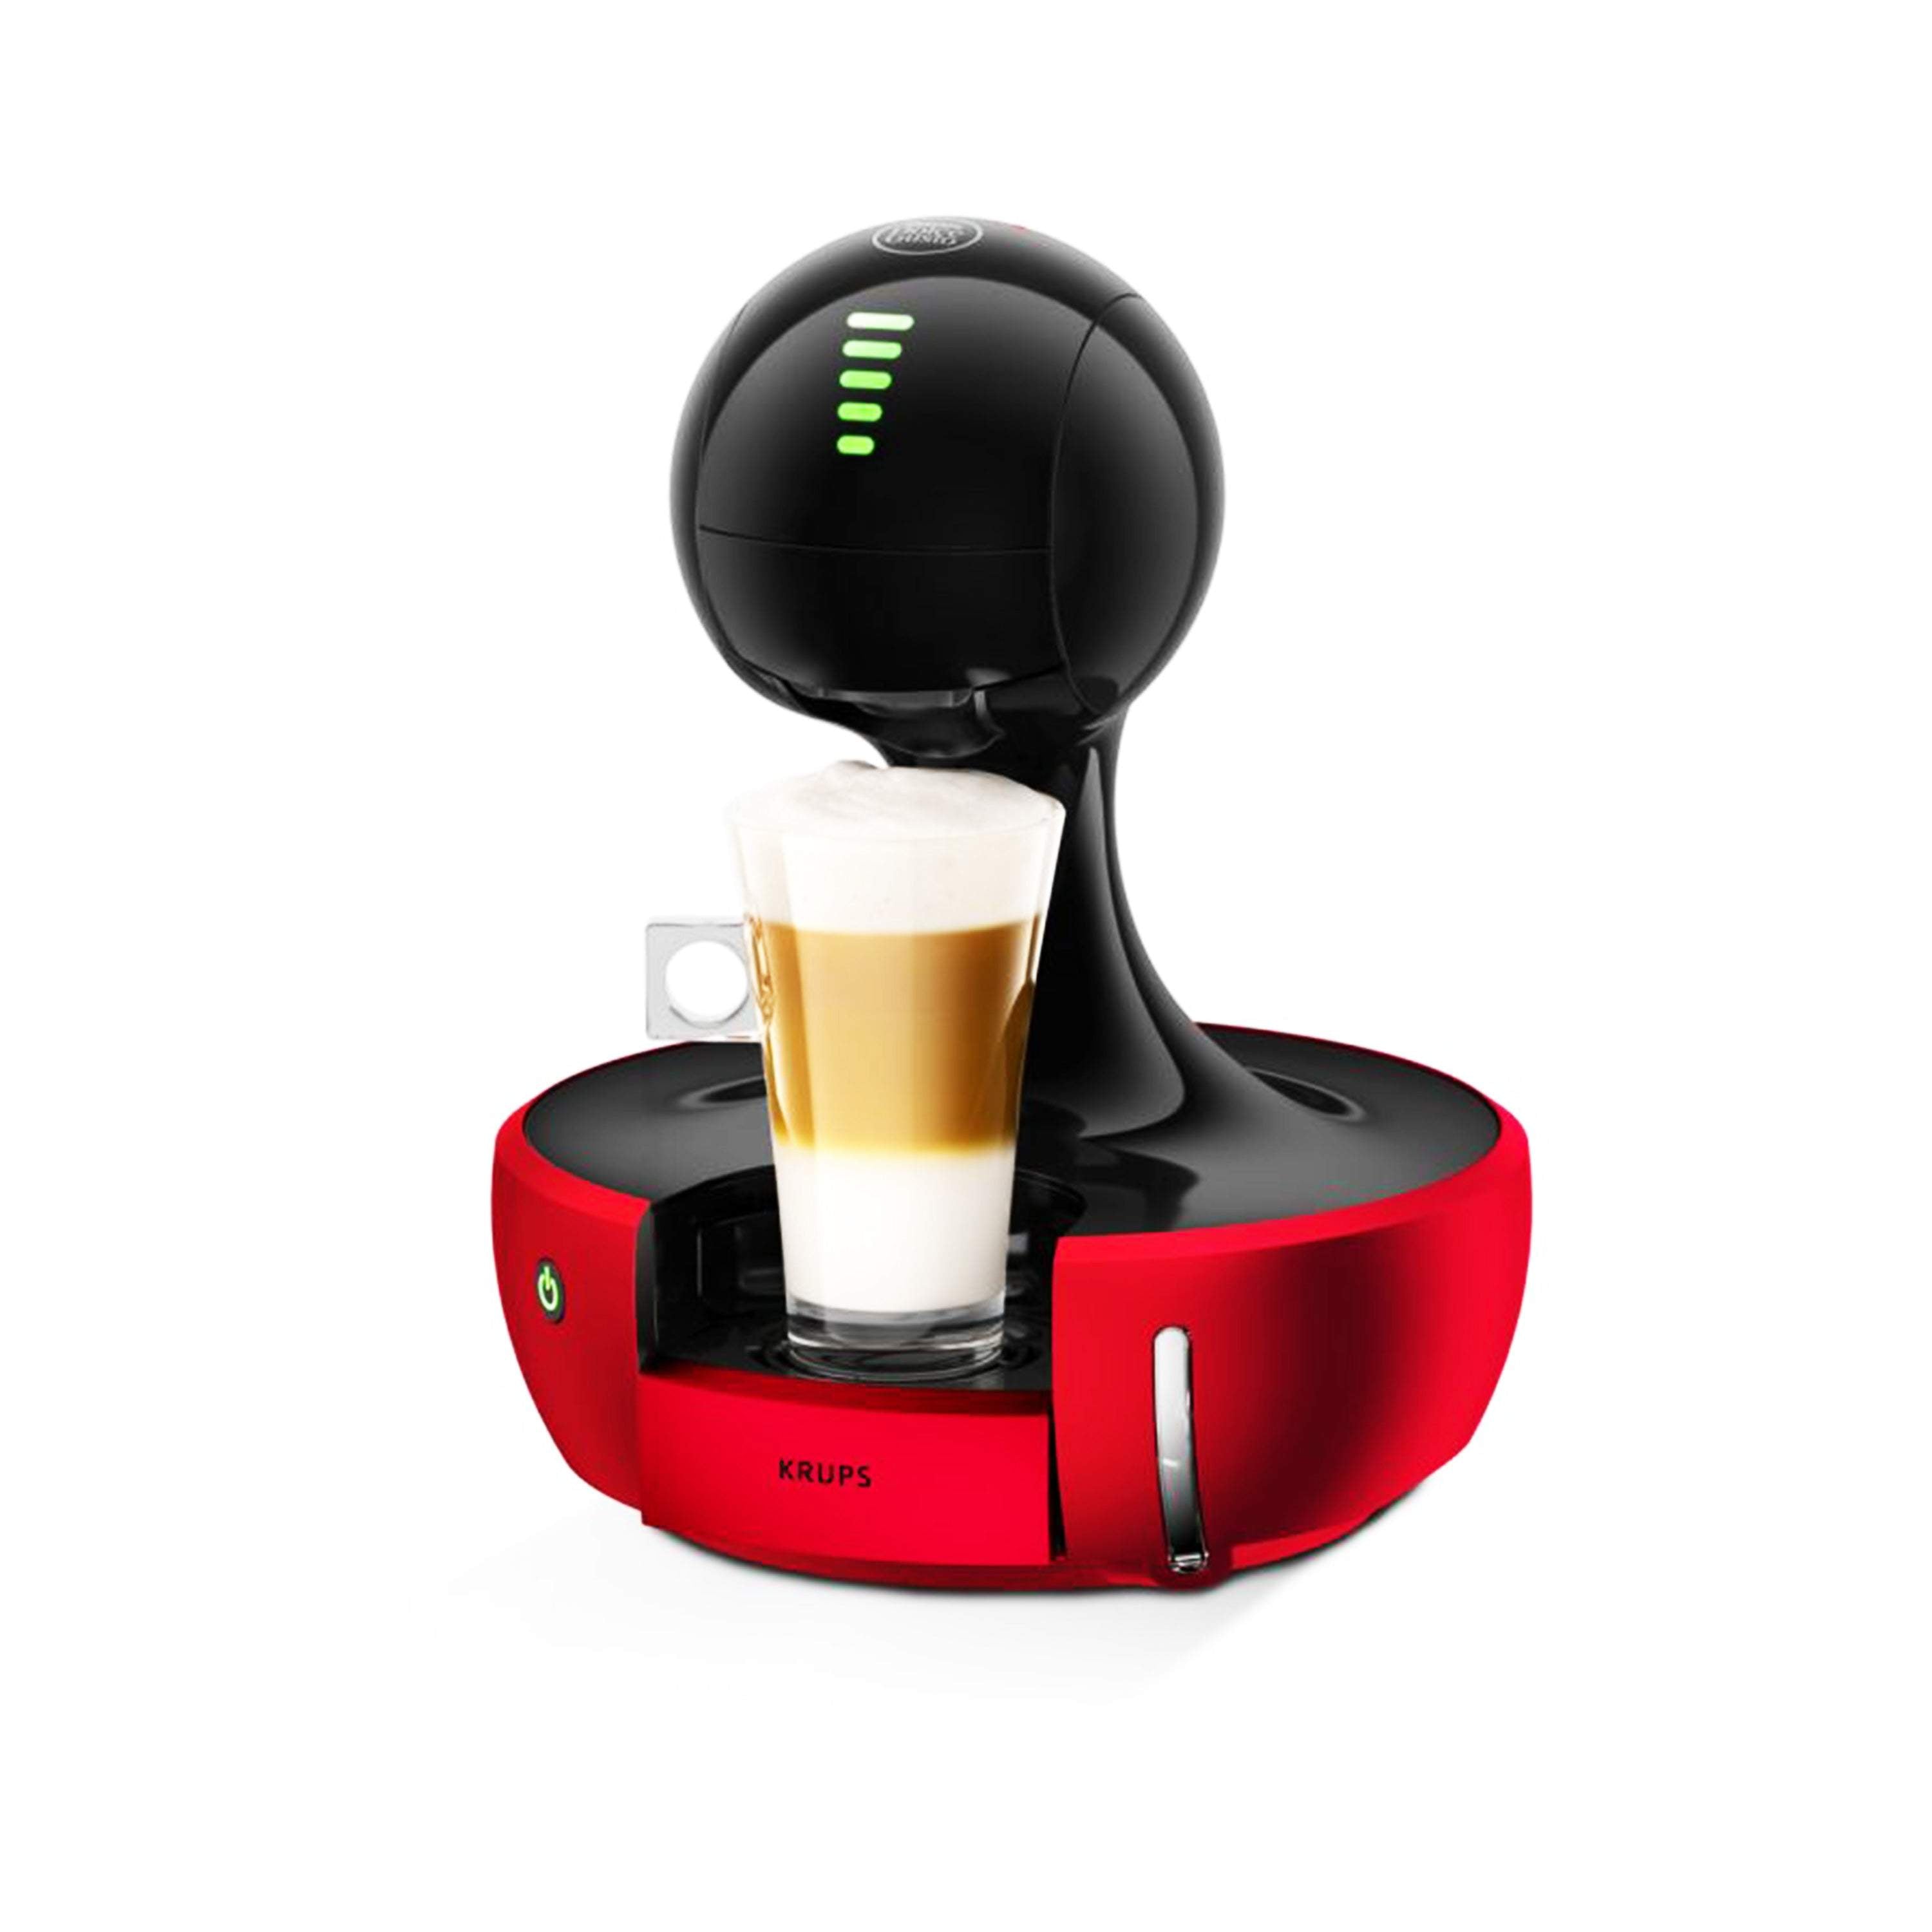 Nescafe Dolce Gusto KRUPS Automatic Coffee Capsule Machine Home and Office Multifunction Efficient High-Efficiency Intelligent Hot and Cold 1500W-Royal Brands Co-